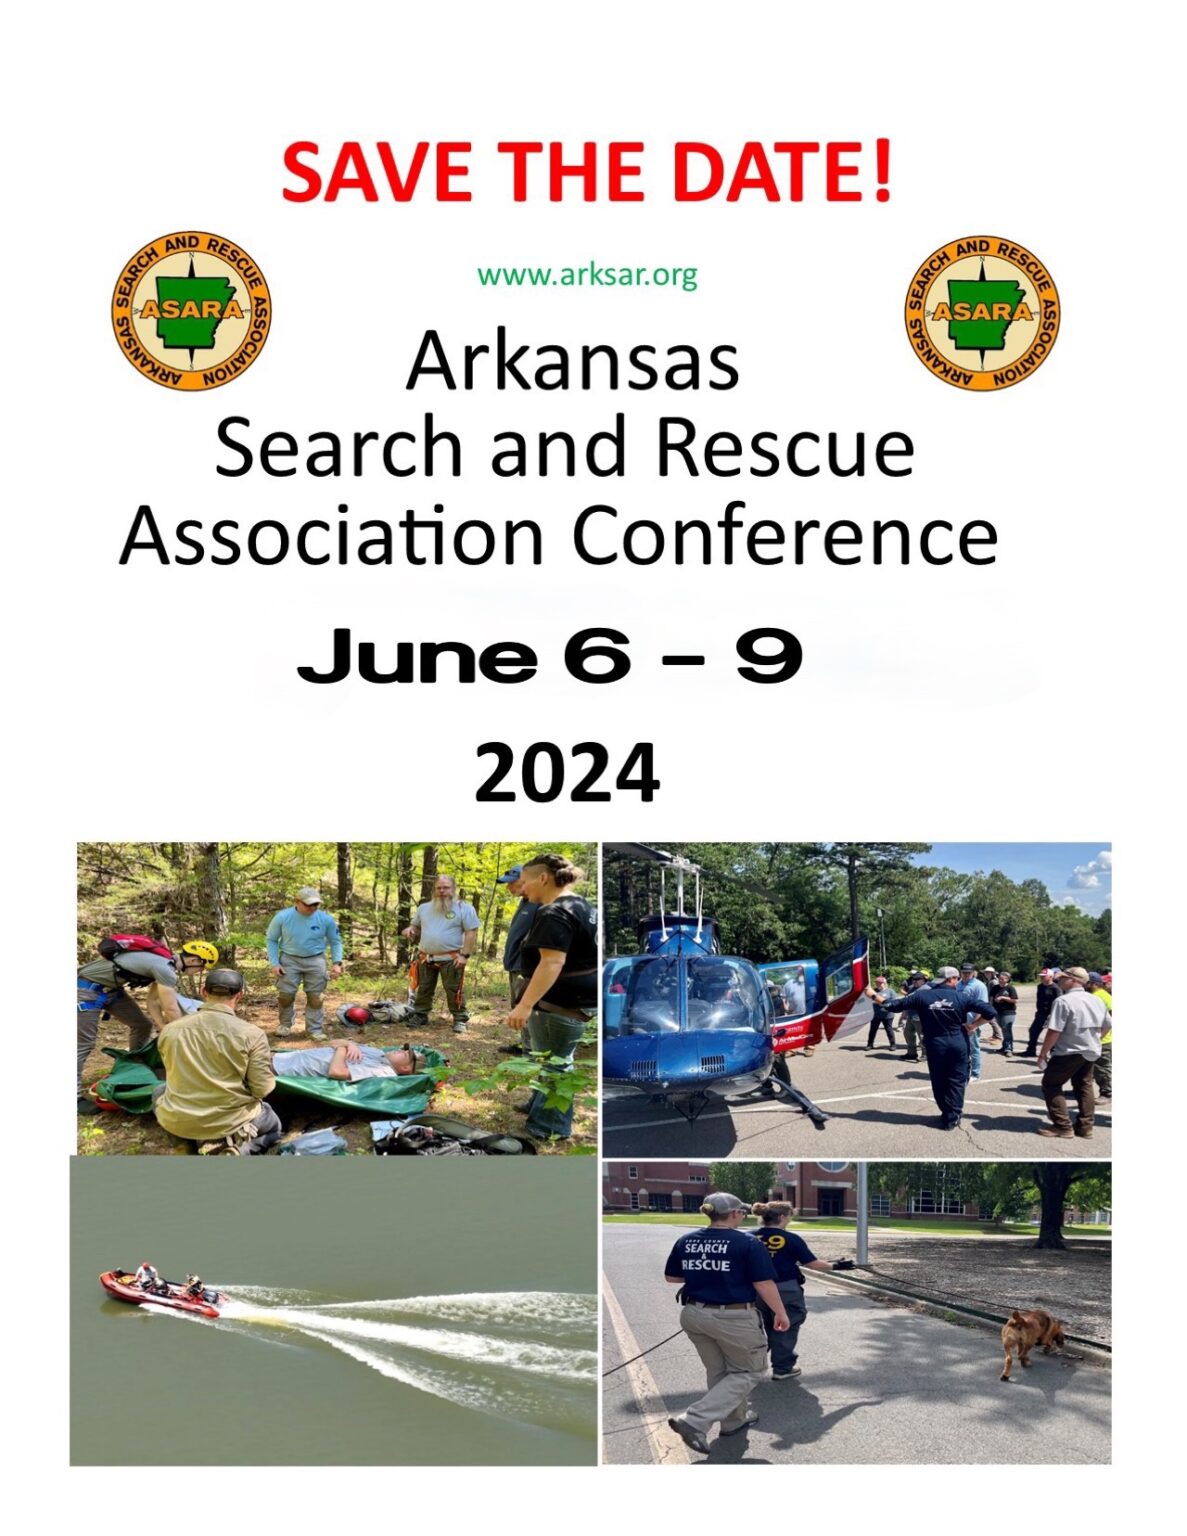 ASARA State SAR Conference Arkansas Search and Rescue Association